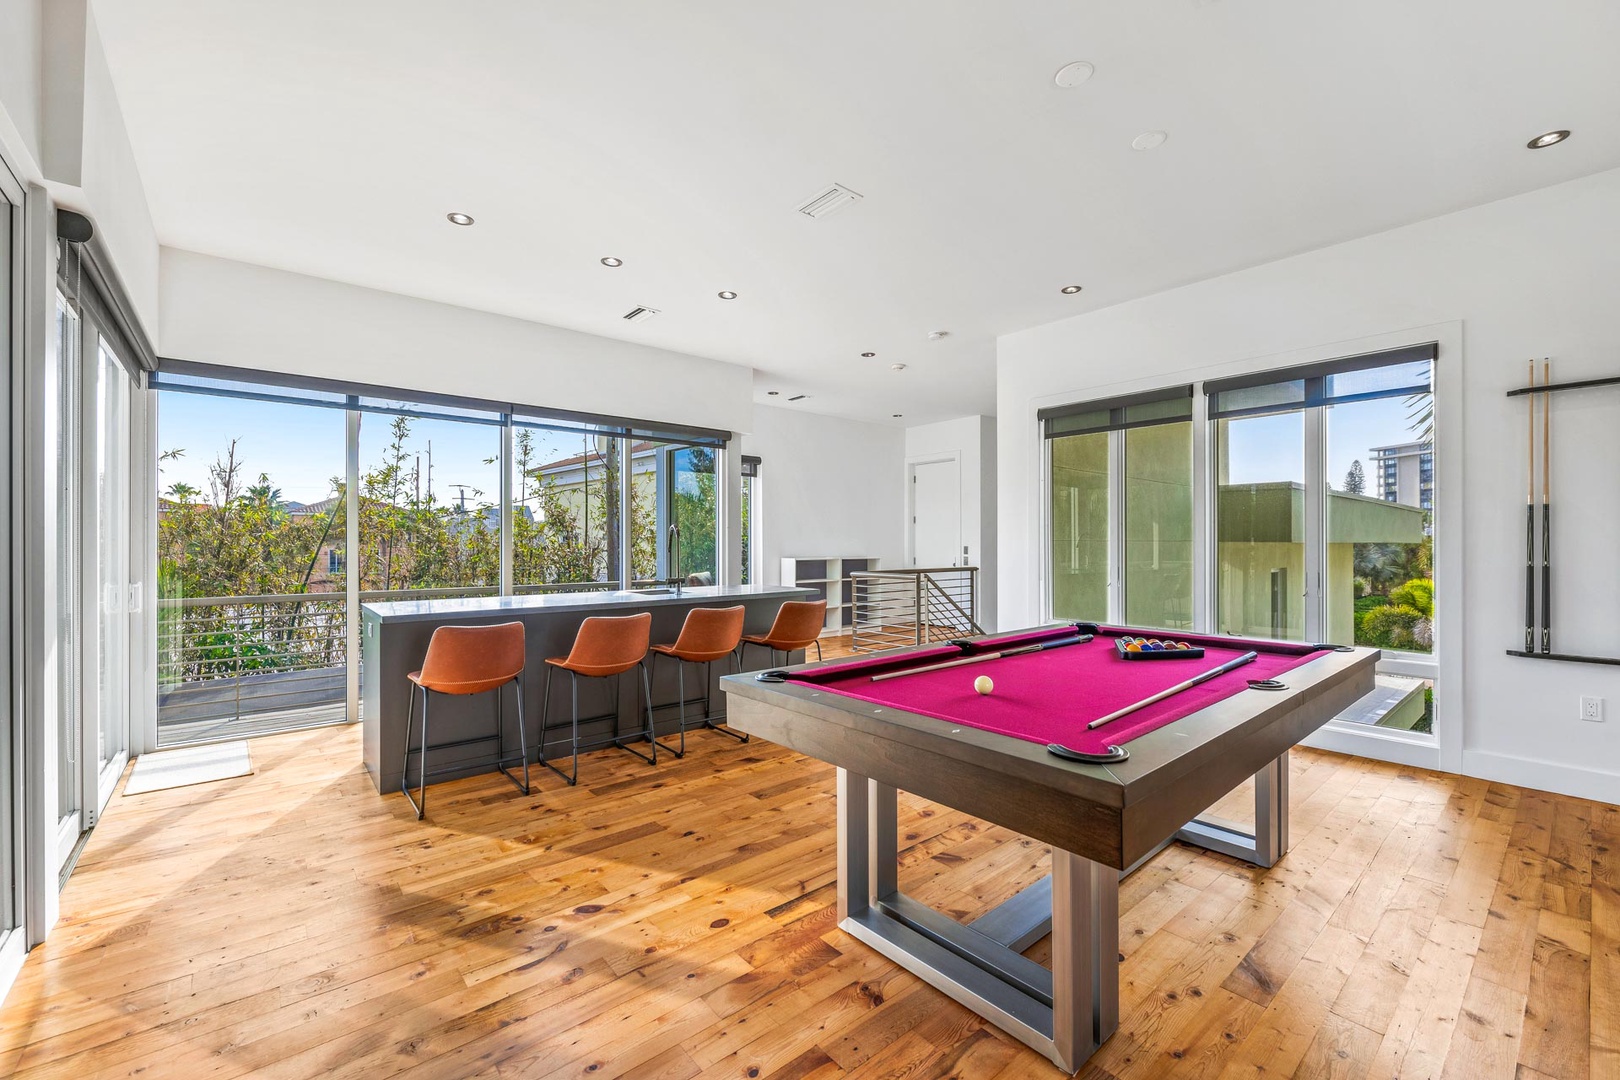 Game Room - Pool table, Wet Bar, Balcony with Seating